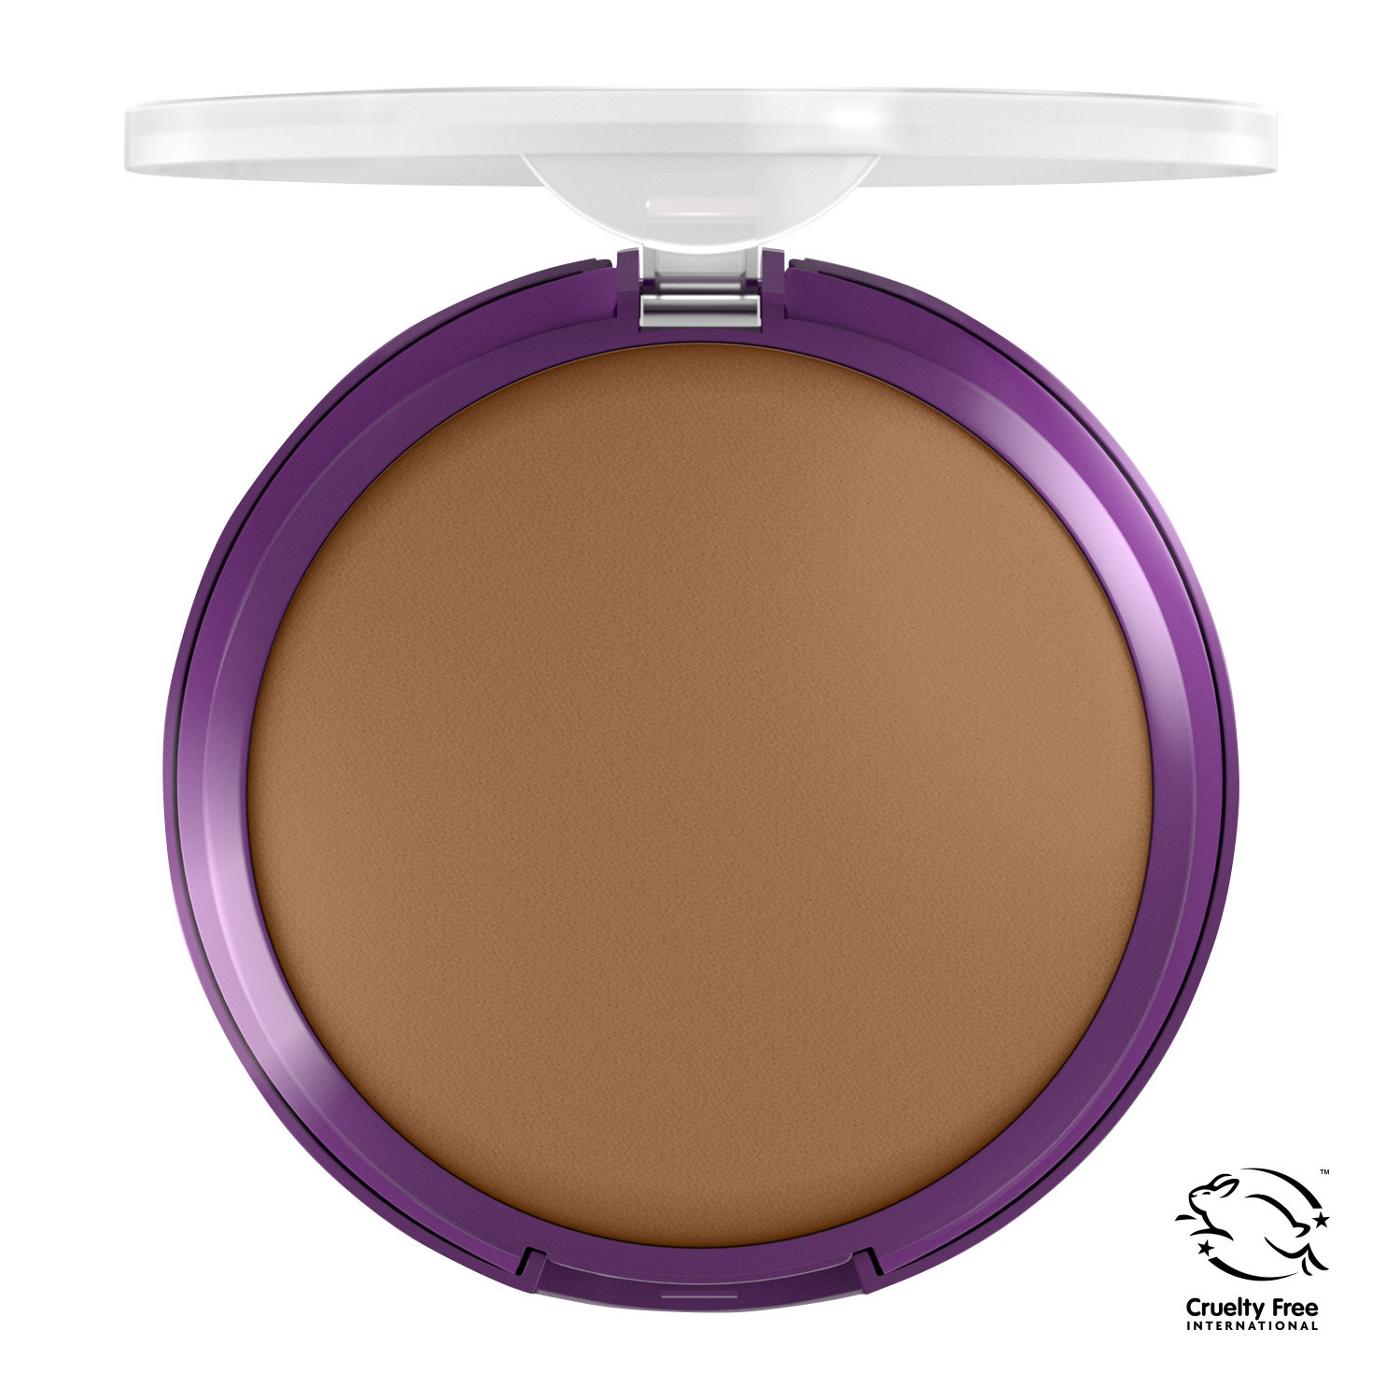 Covergirl Simply Ageless Pressed Powder 265 Tawny; image 6 of 10